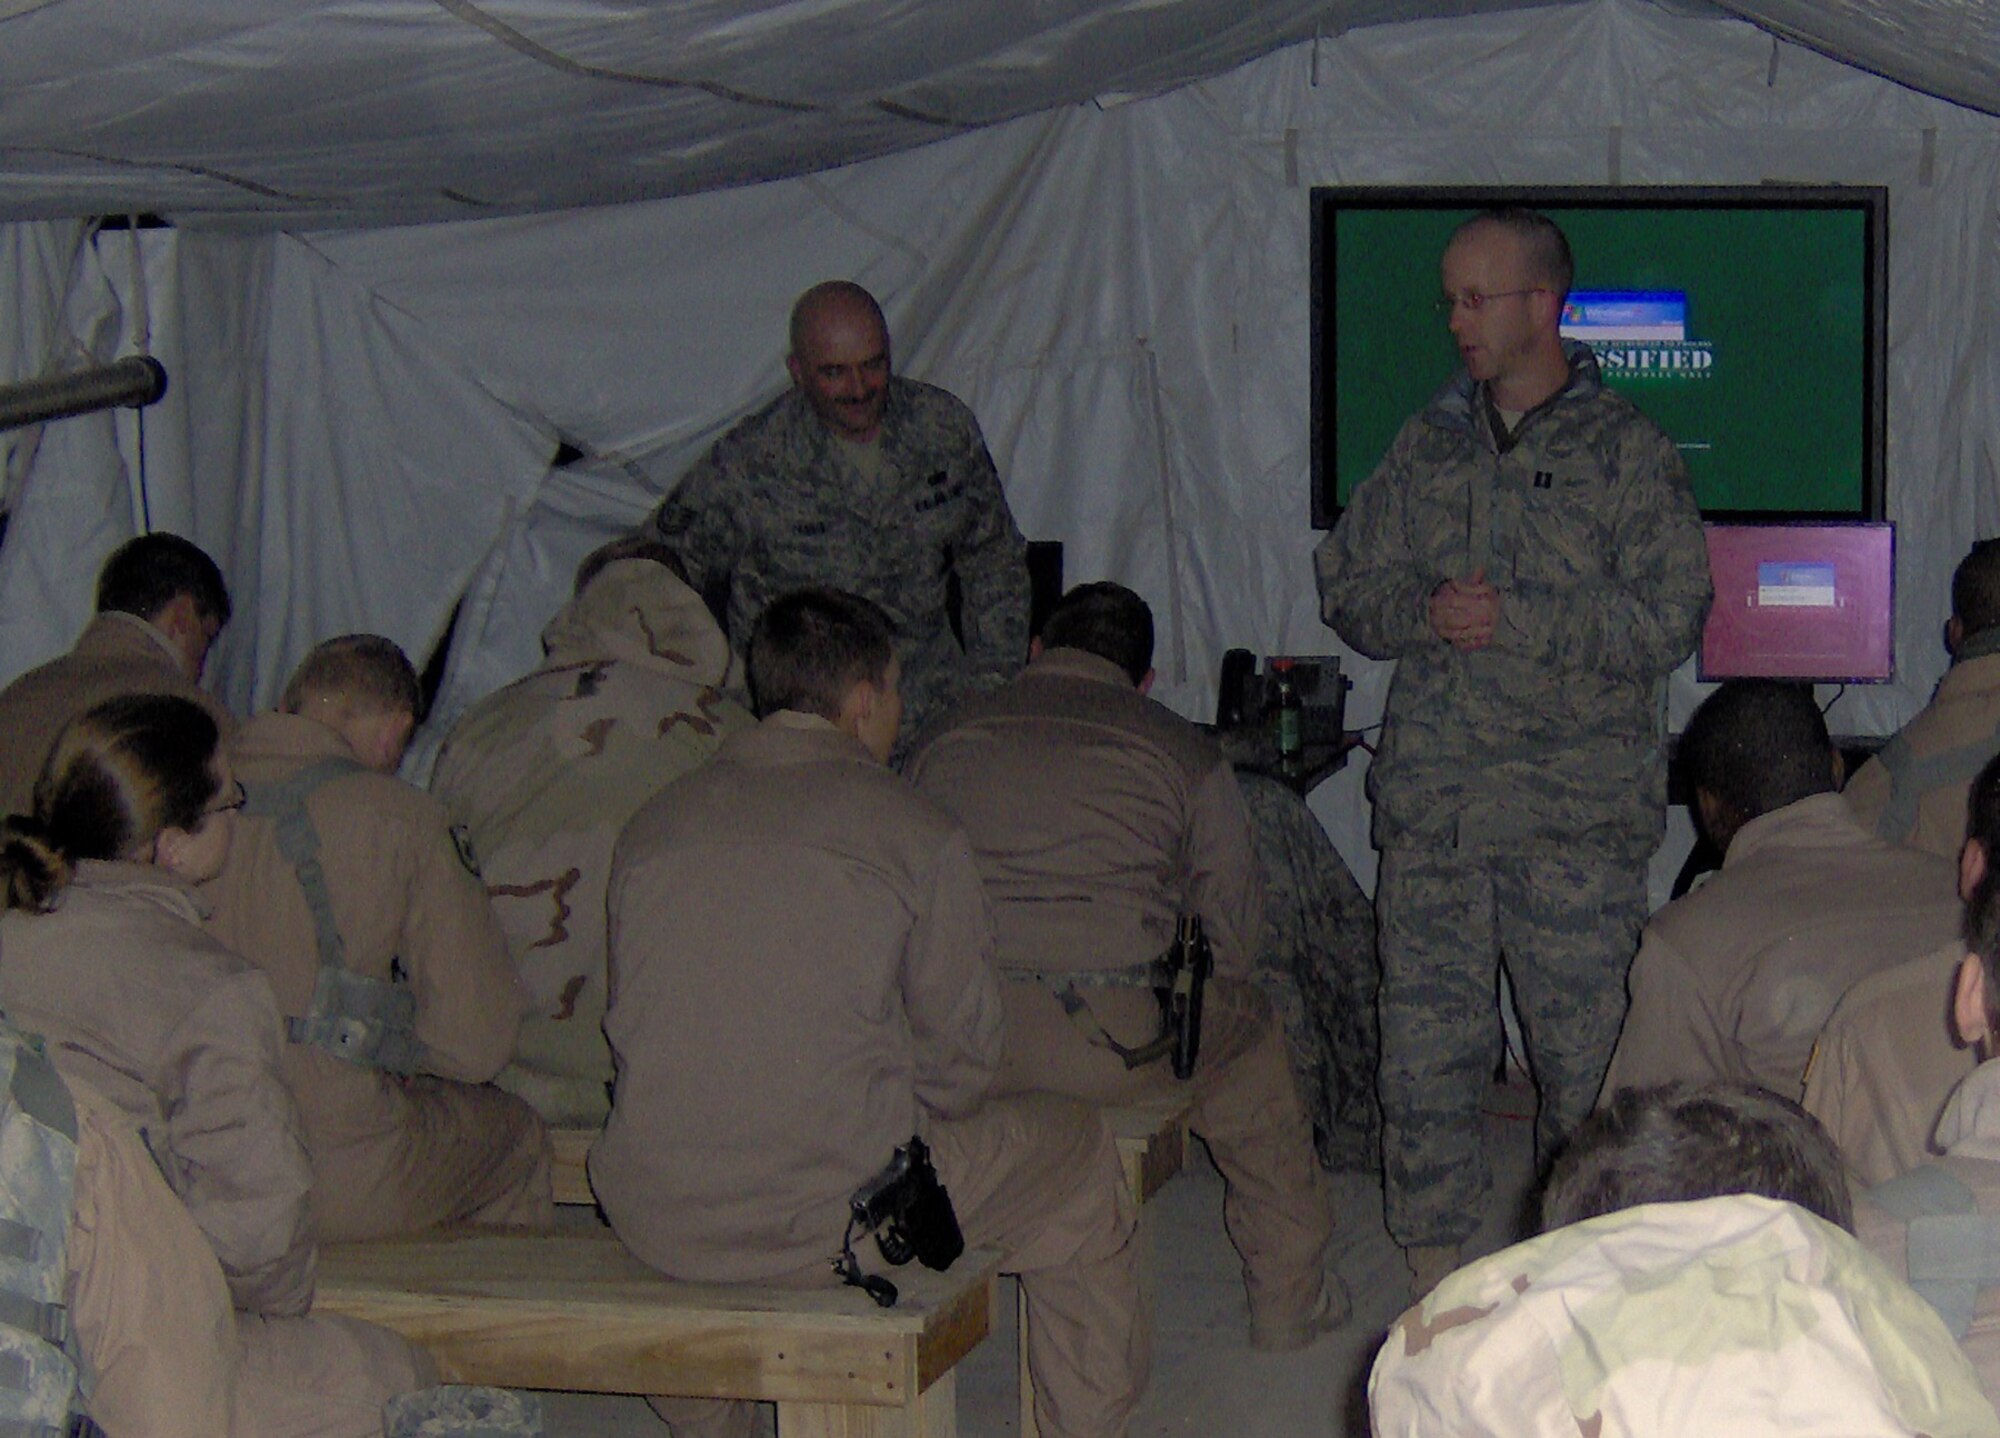 CAMP BUCCA, Iraq -- Chaplain (Capt.) Rolf Holmquist, 887th Expeditionary Secruity Forces Squadron chaplain, speaks to 887th ESFS members during a guardmount before a mission. Chaplain Holmquist practices a "ministry of presence" and believes the best way to relate to the Airmen in his care is to "walk in their shoes." (U.S. Air Force photo by Staff Sgt. Jahn Espino)